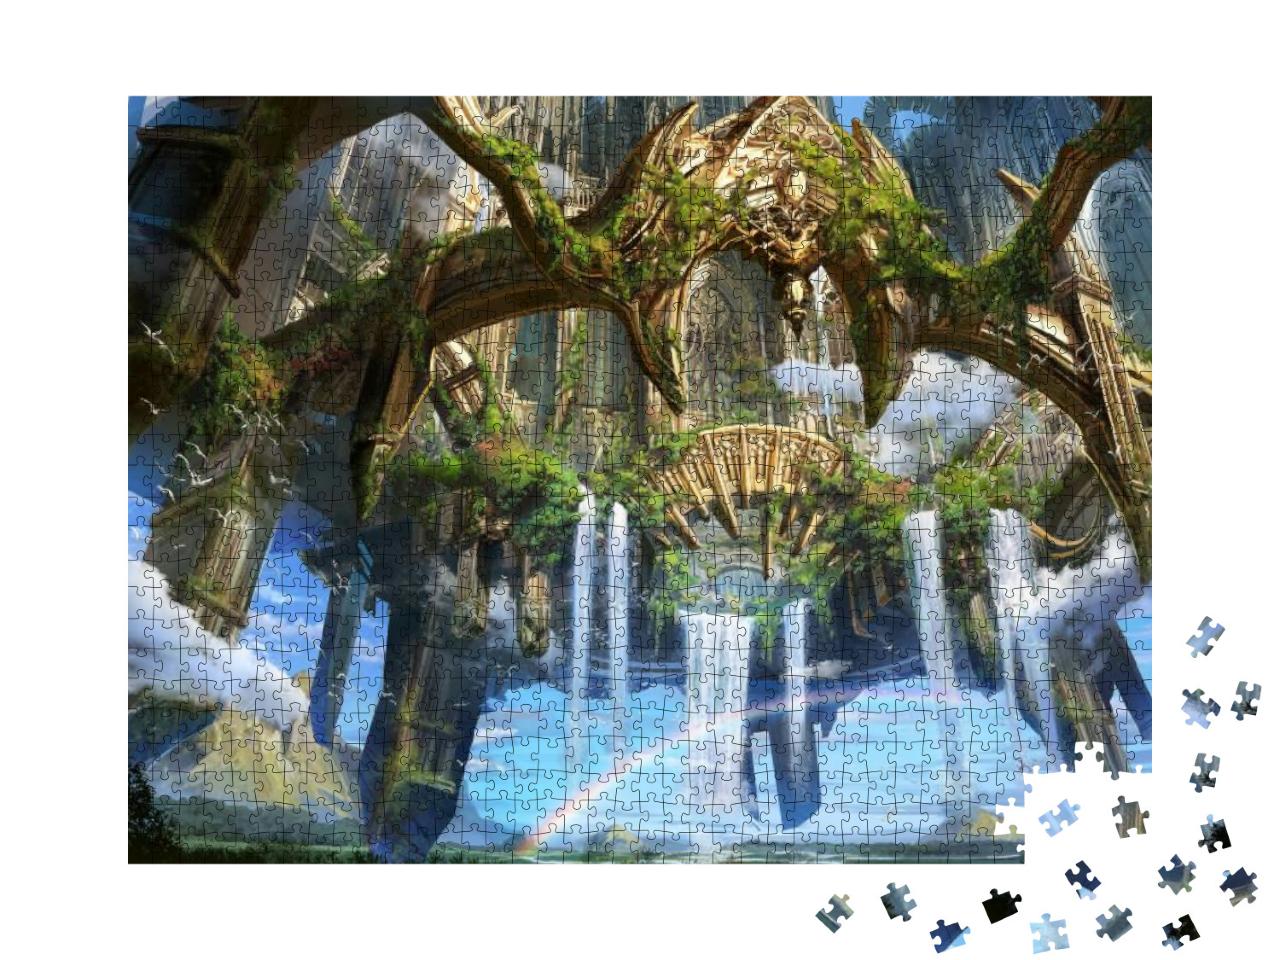 Digital Illustration of Fantasy Medieval Environment Land... Jigsaw Puzzle with 1000 pieces